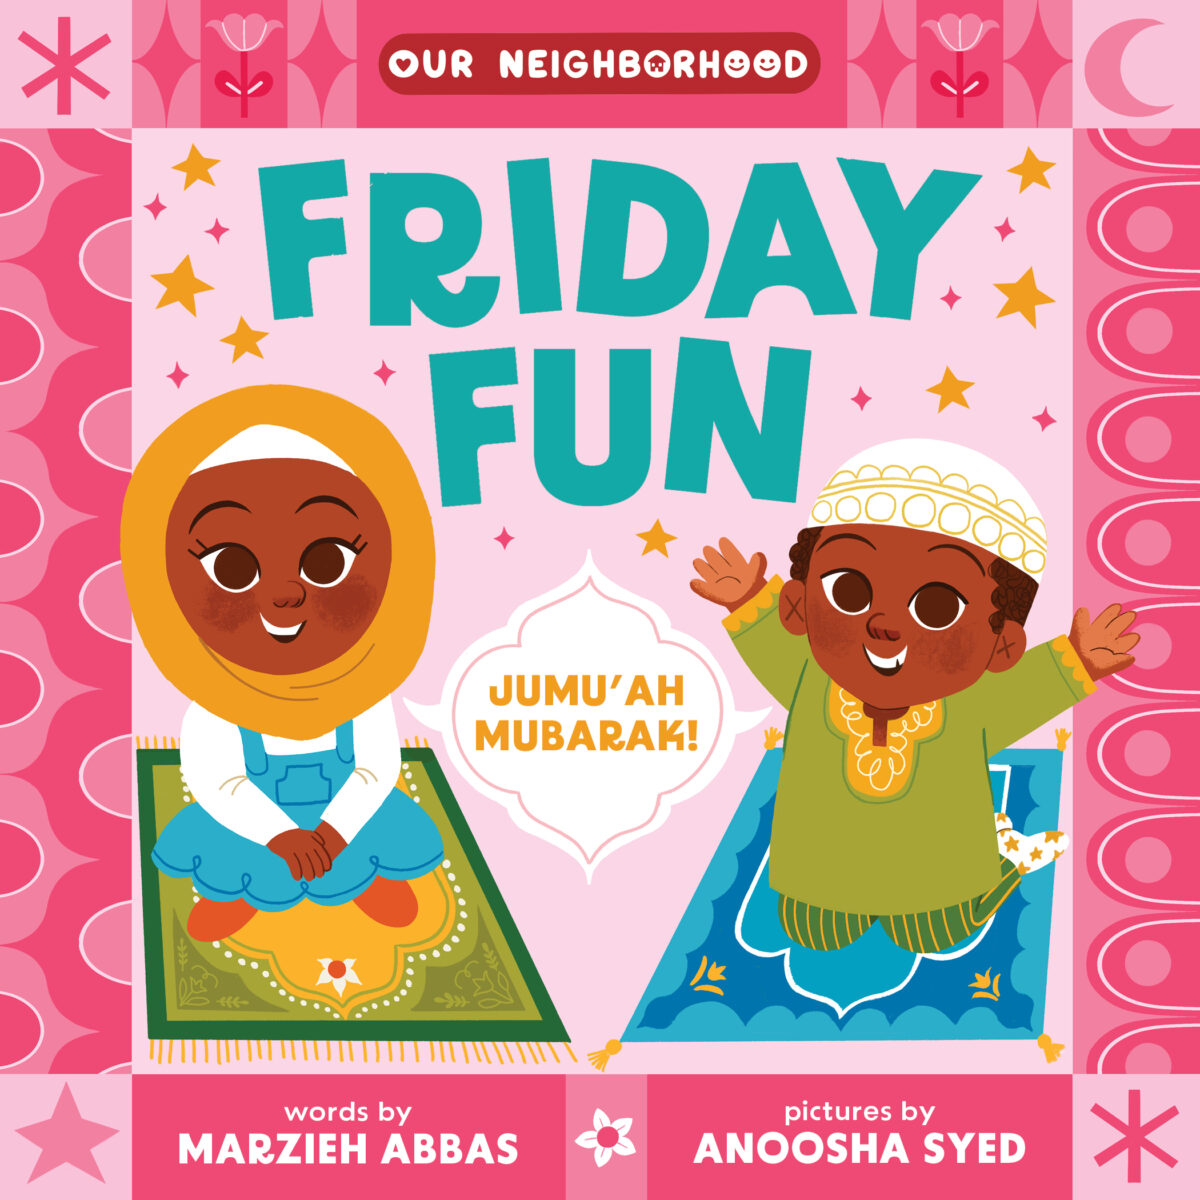 Friday Fun (An Our Neighborhood Series Board Book for Toddlers Celebrating Islam)